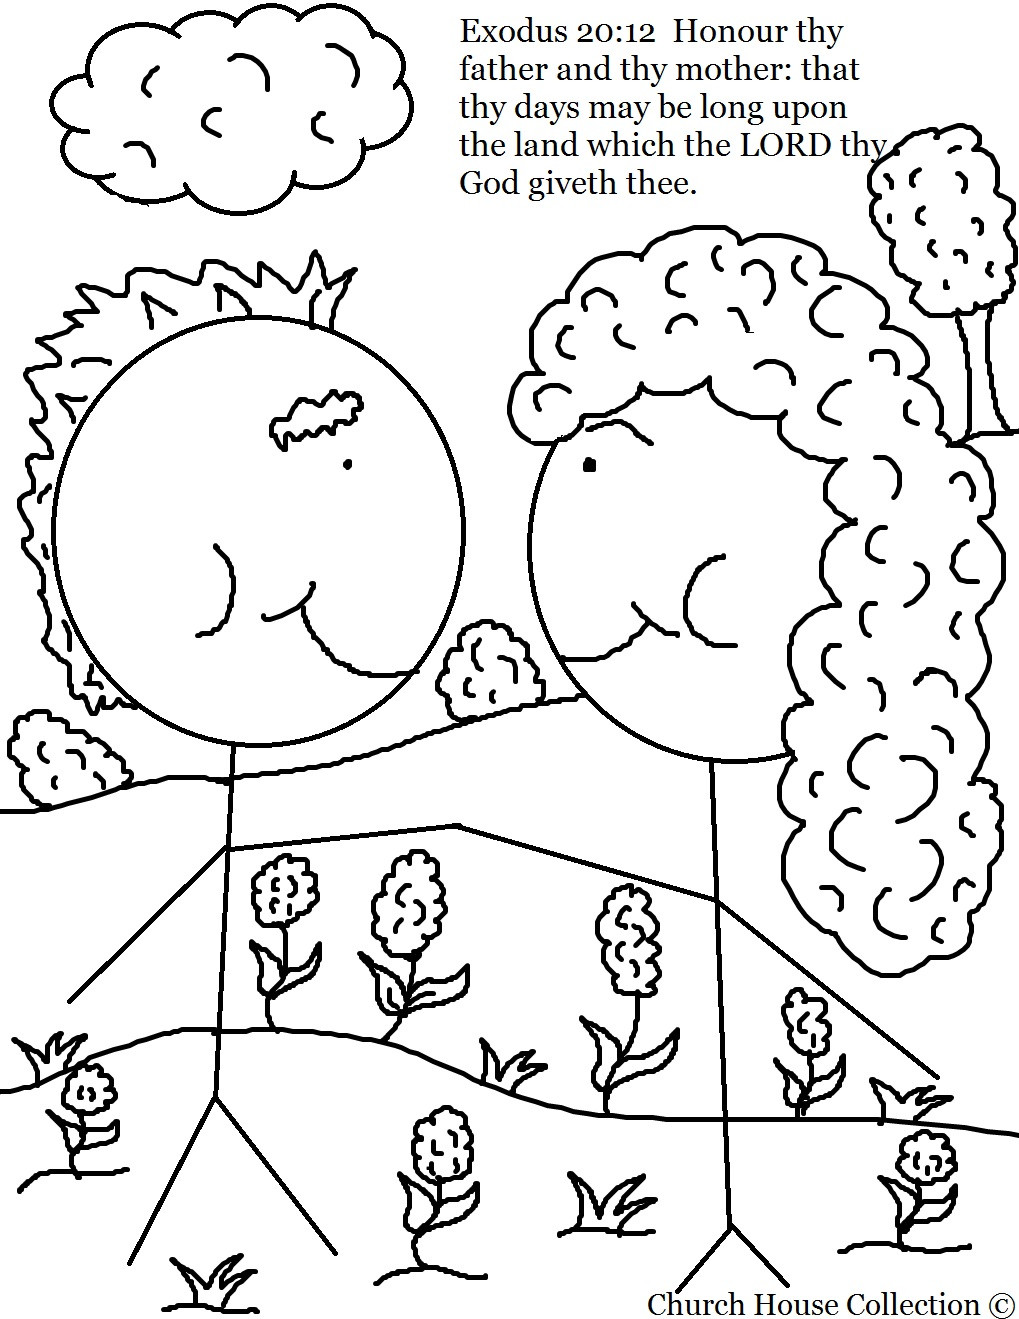 Children Obey Your Parents Coloring Page
 Children Obey Your Parents Coloring Page at GetColorings